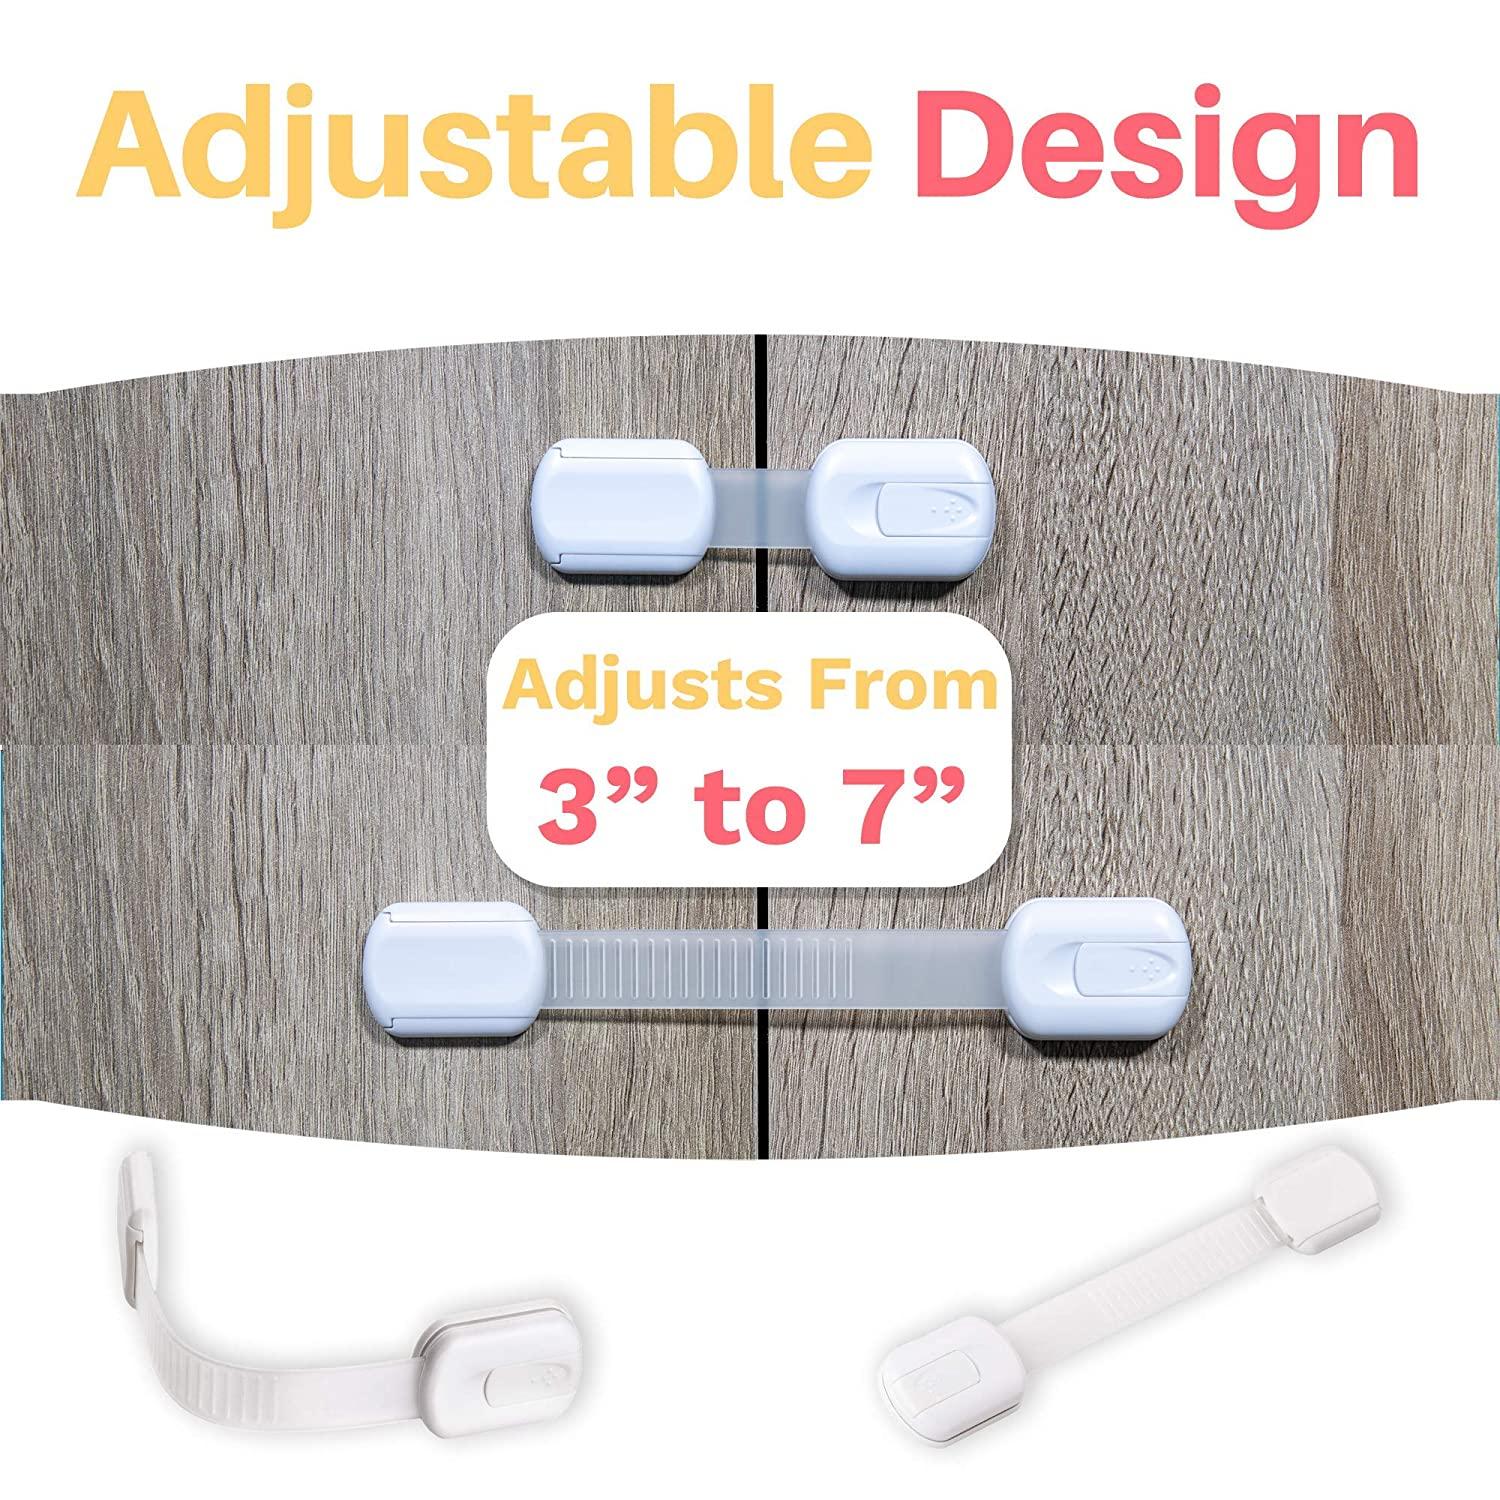 Inaya Complete Baby Proofing Kit - Child Safety Hidden Locks for Cabinets &  Drawers, Adjustable Safety Latches, Corner Guards and Outlet Covers - Baby